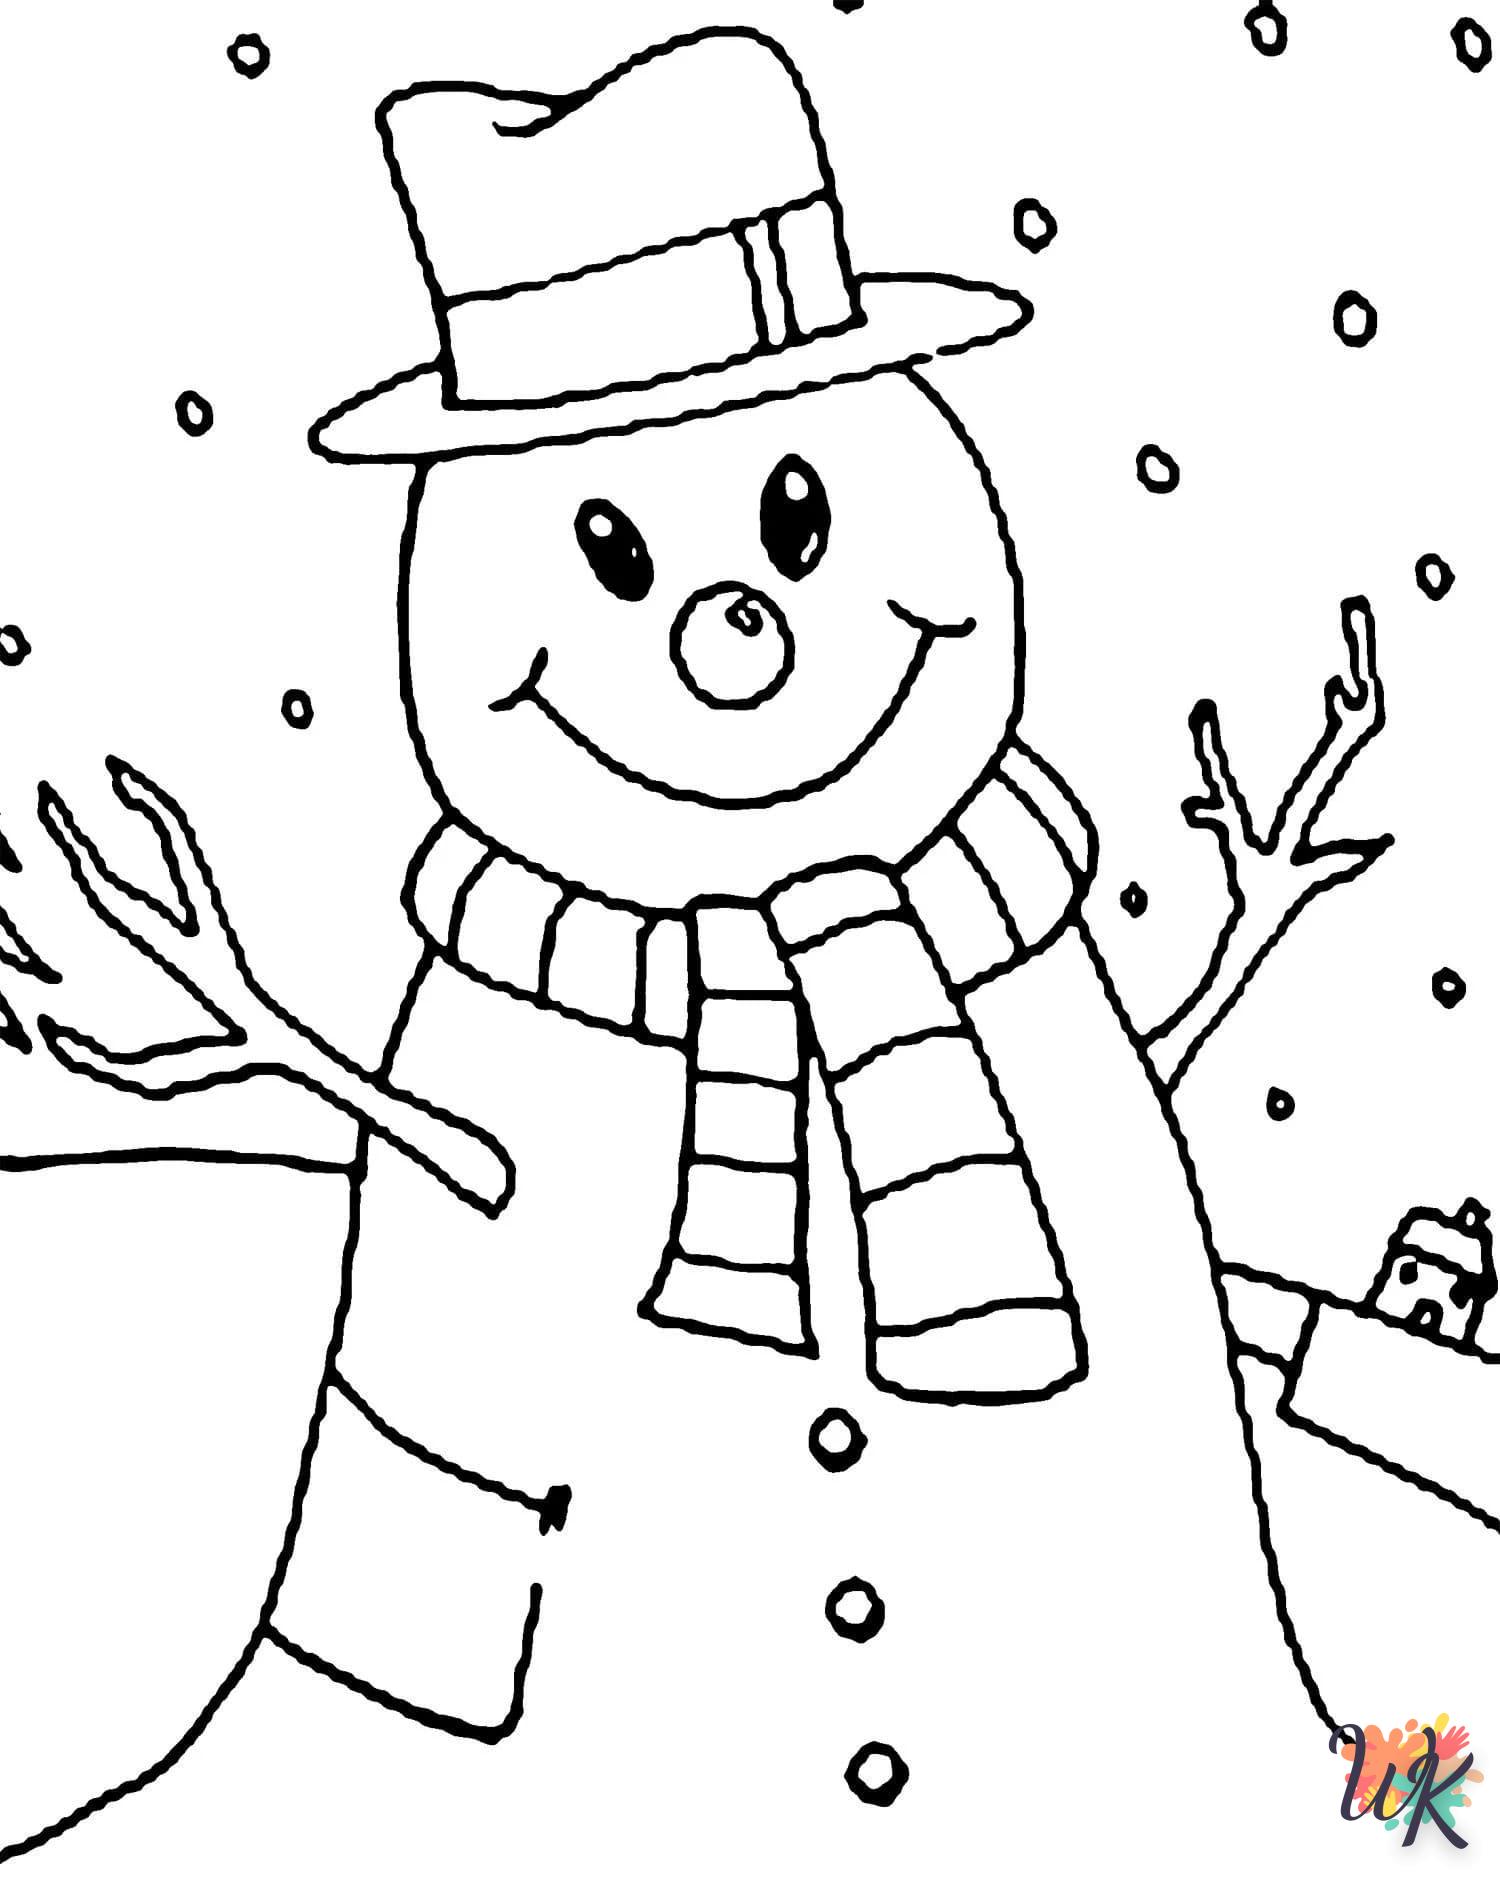 Snowman coloring page to draw and print